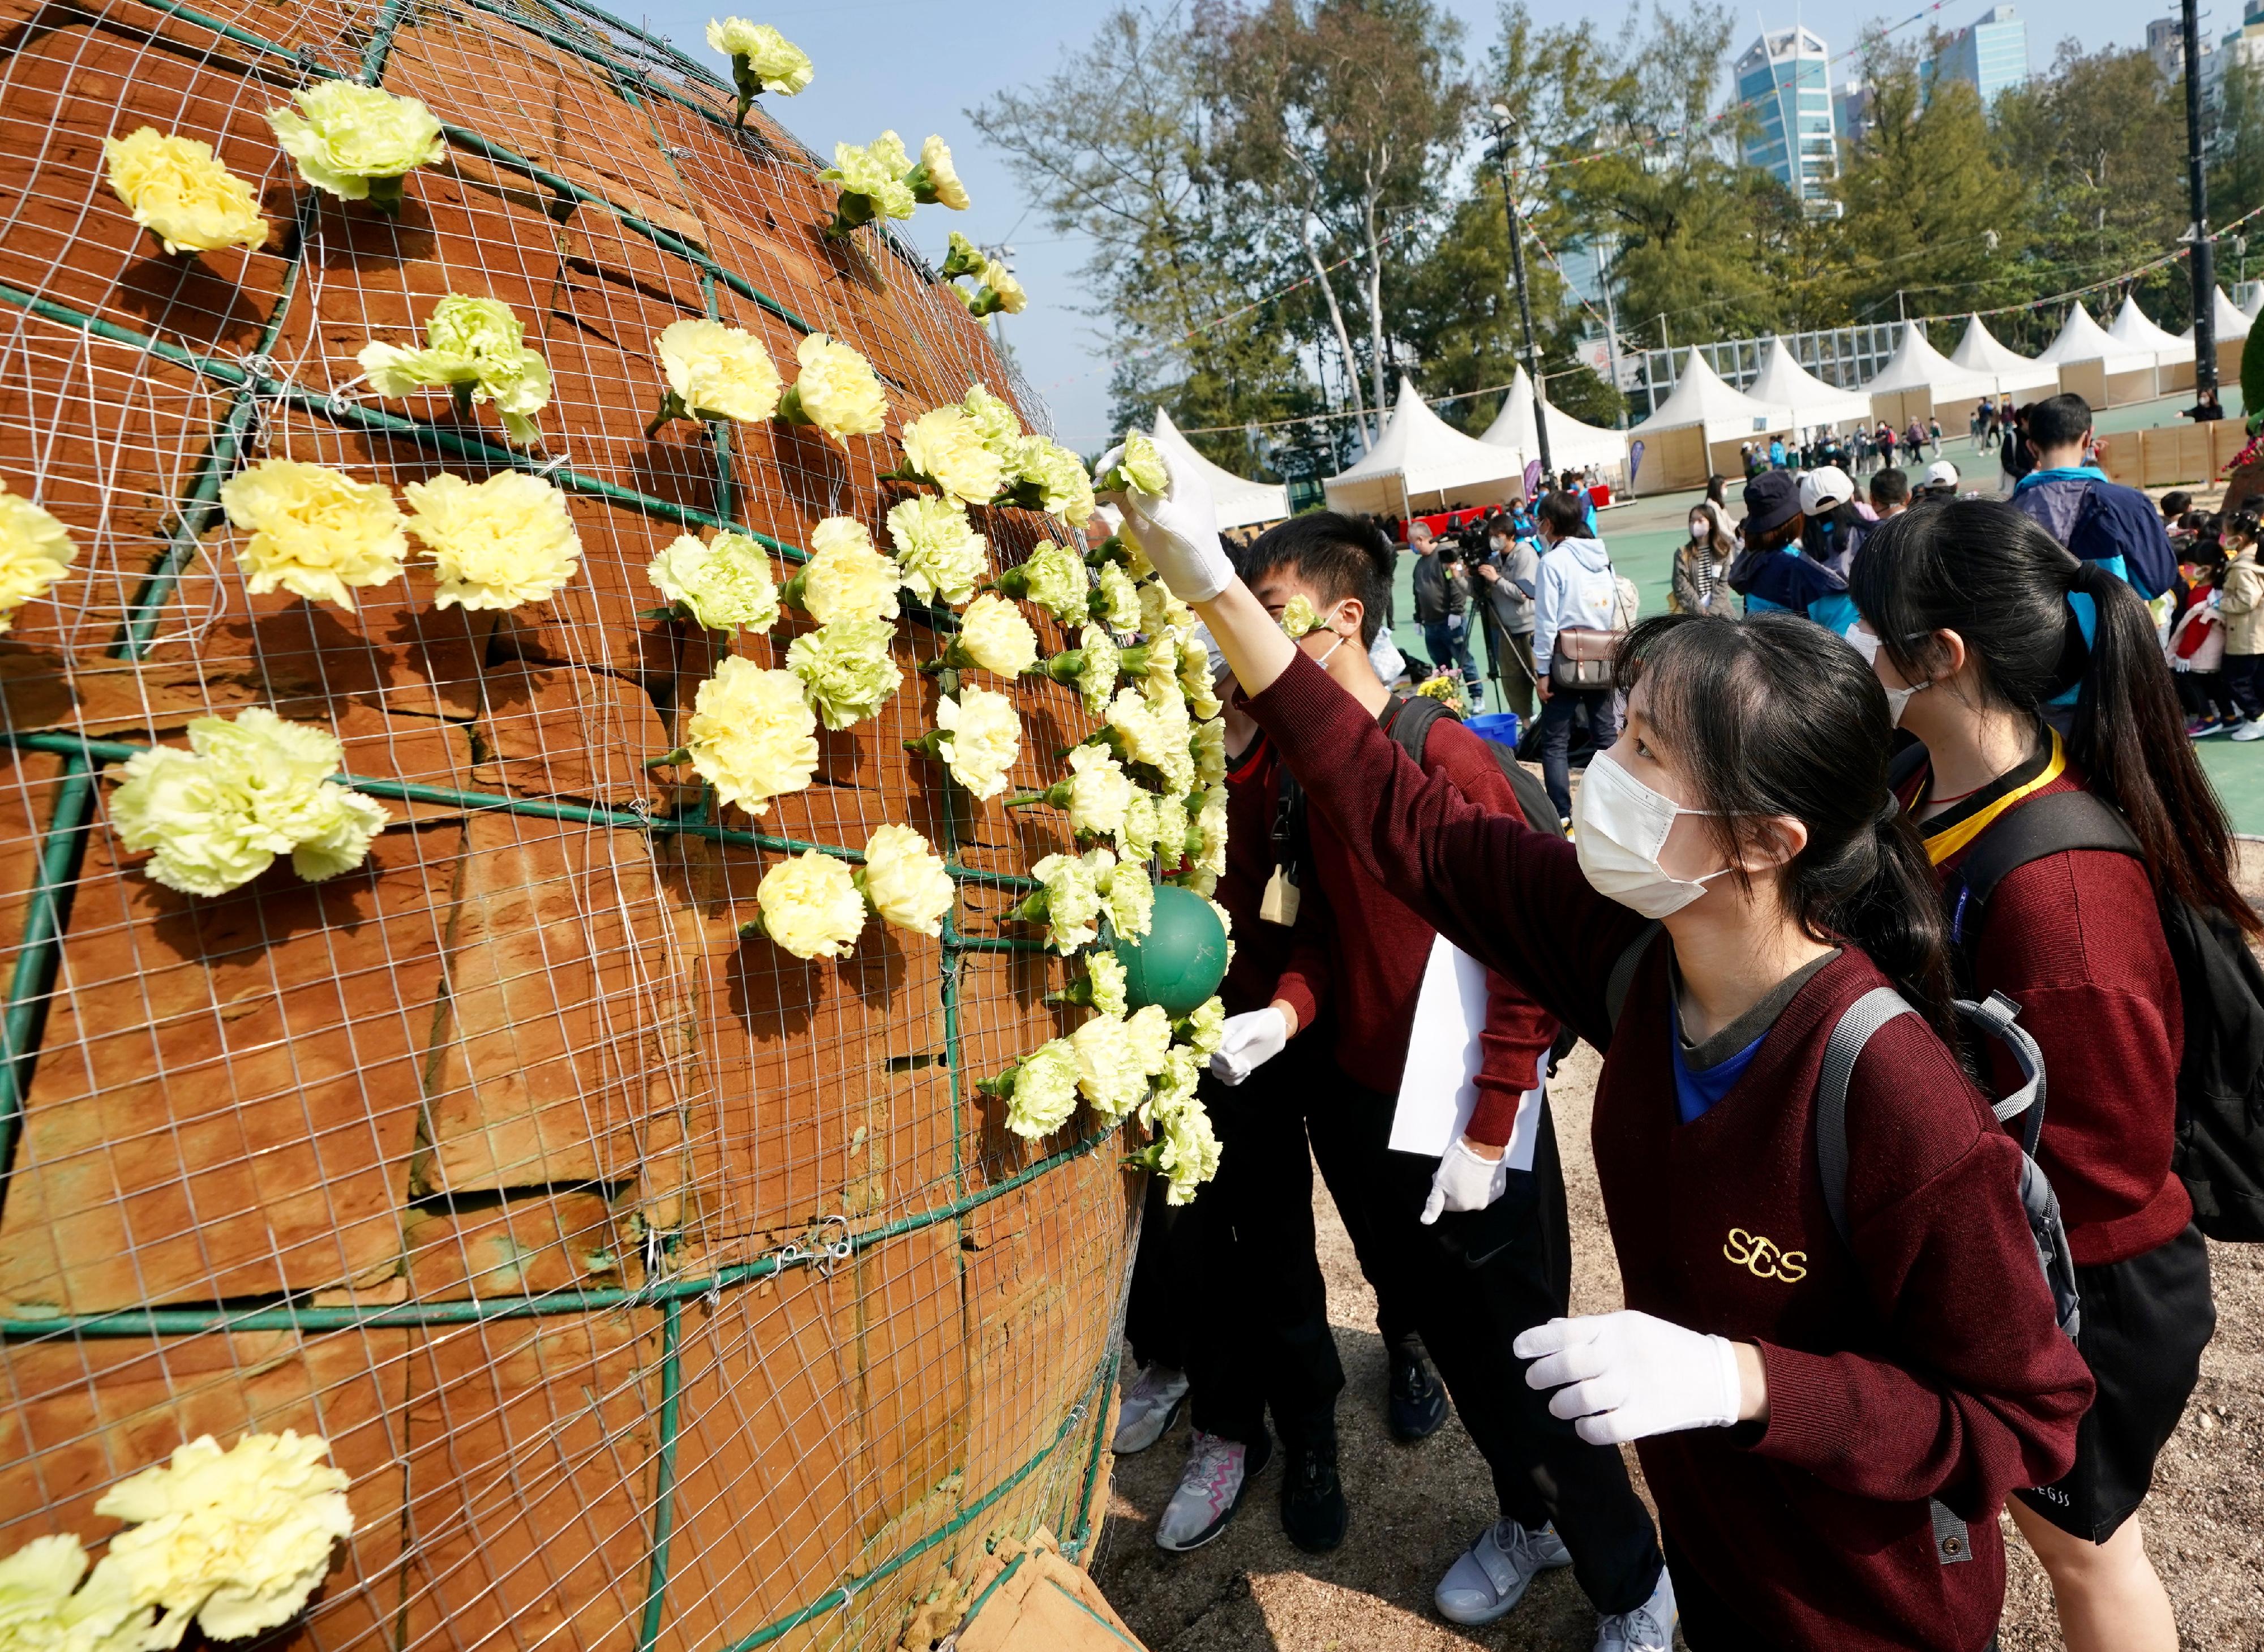 About 1 000 students from 32 schools worked together to help put on the spectacular horticultural display "Midsummer Jubilation" at Victoria Park today (February 25). Photo shows students working on the horticultural display.